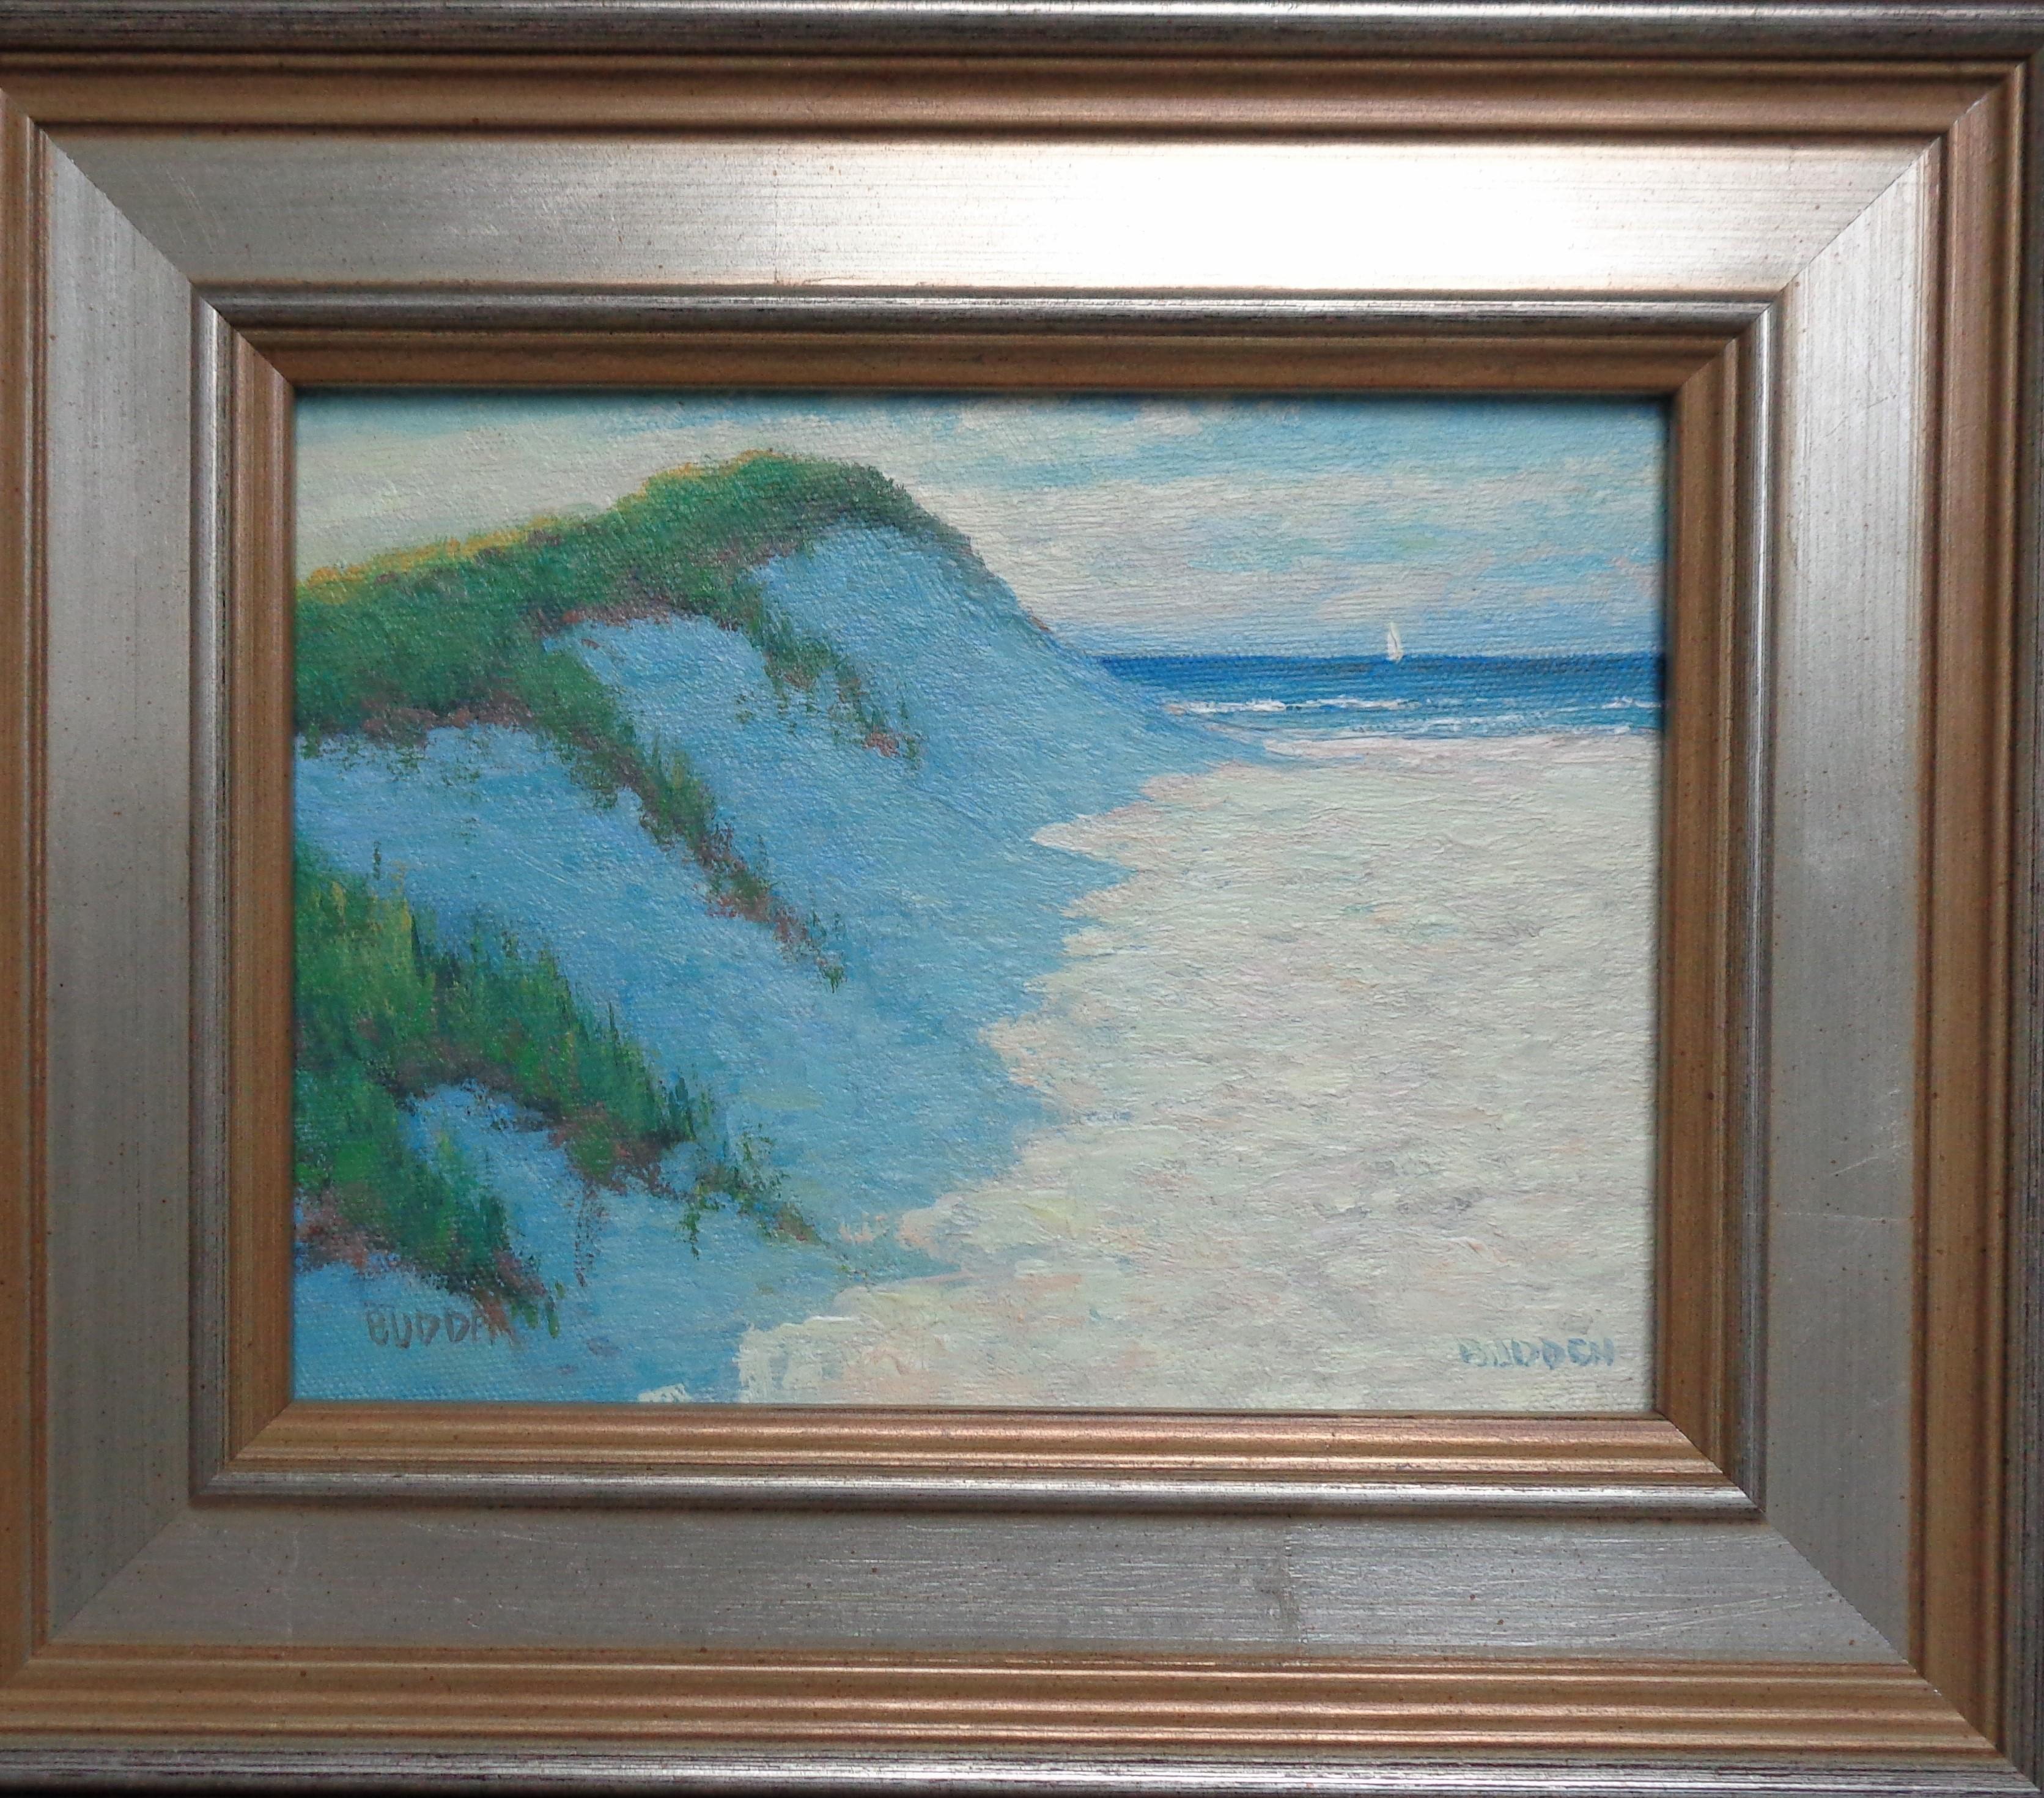 High Dunes Study is an oil painting on canvas panel by award winning contemporary artist Michael Budden that showcases a beautiful view of the ocean with a sailboat off the coast alongside high dunes.  This painting is new and the image measures 6 x